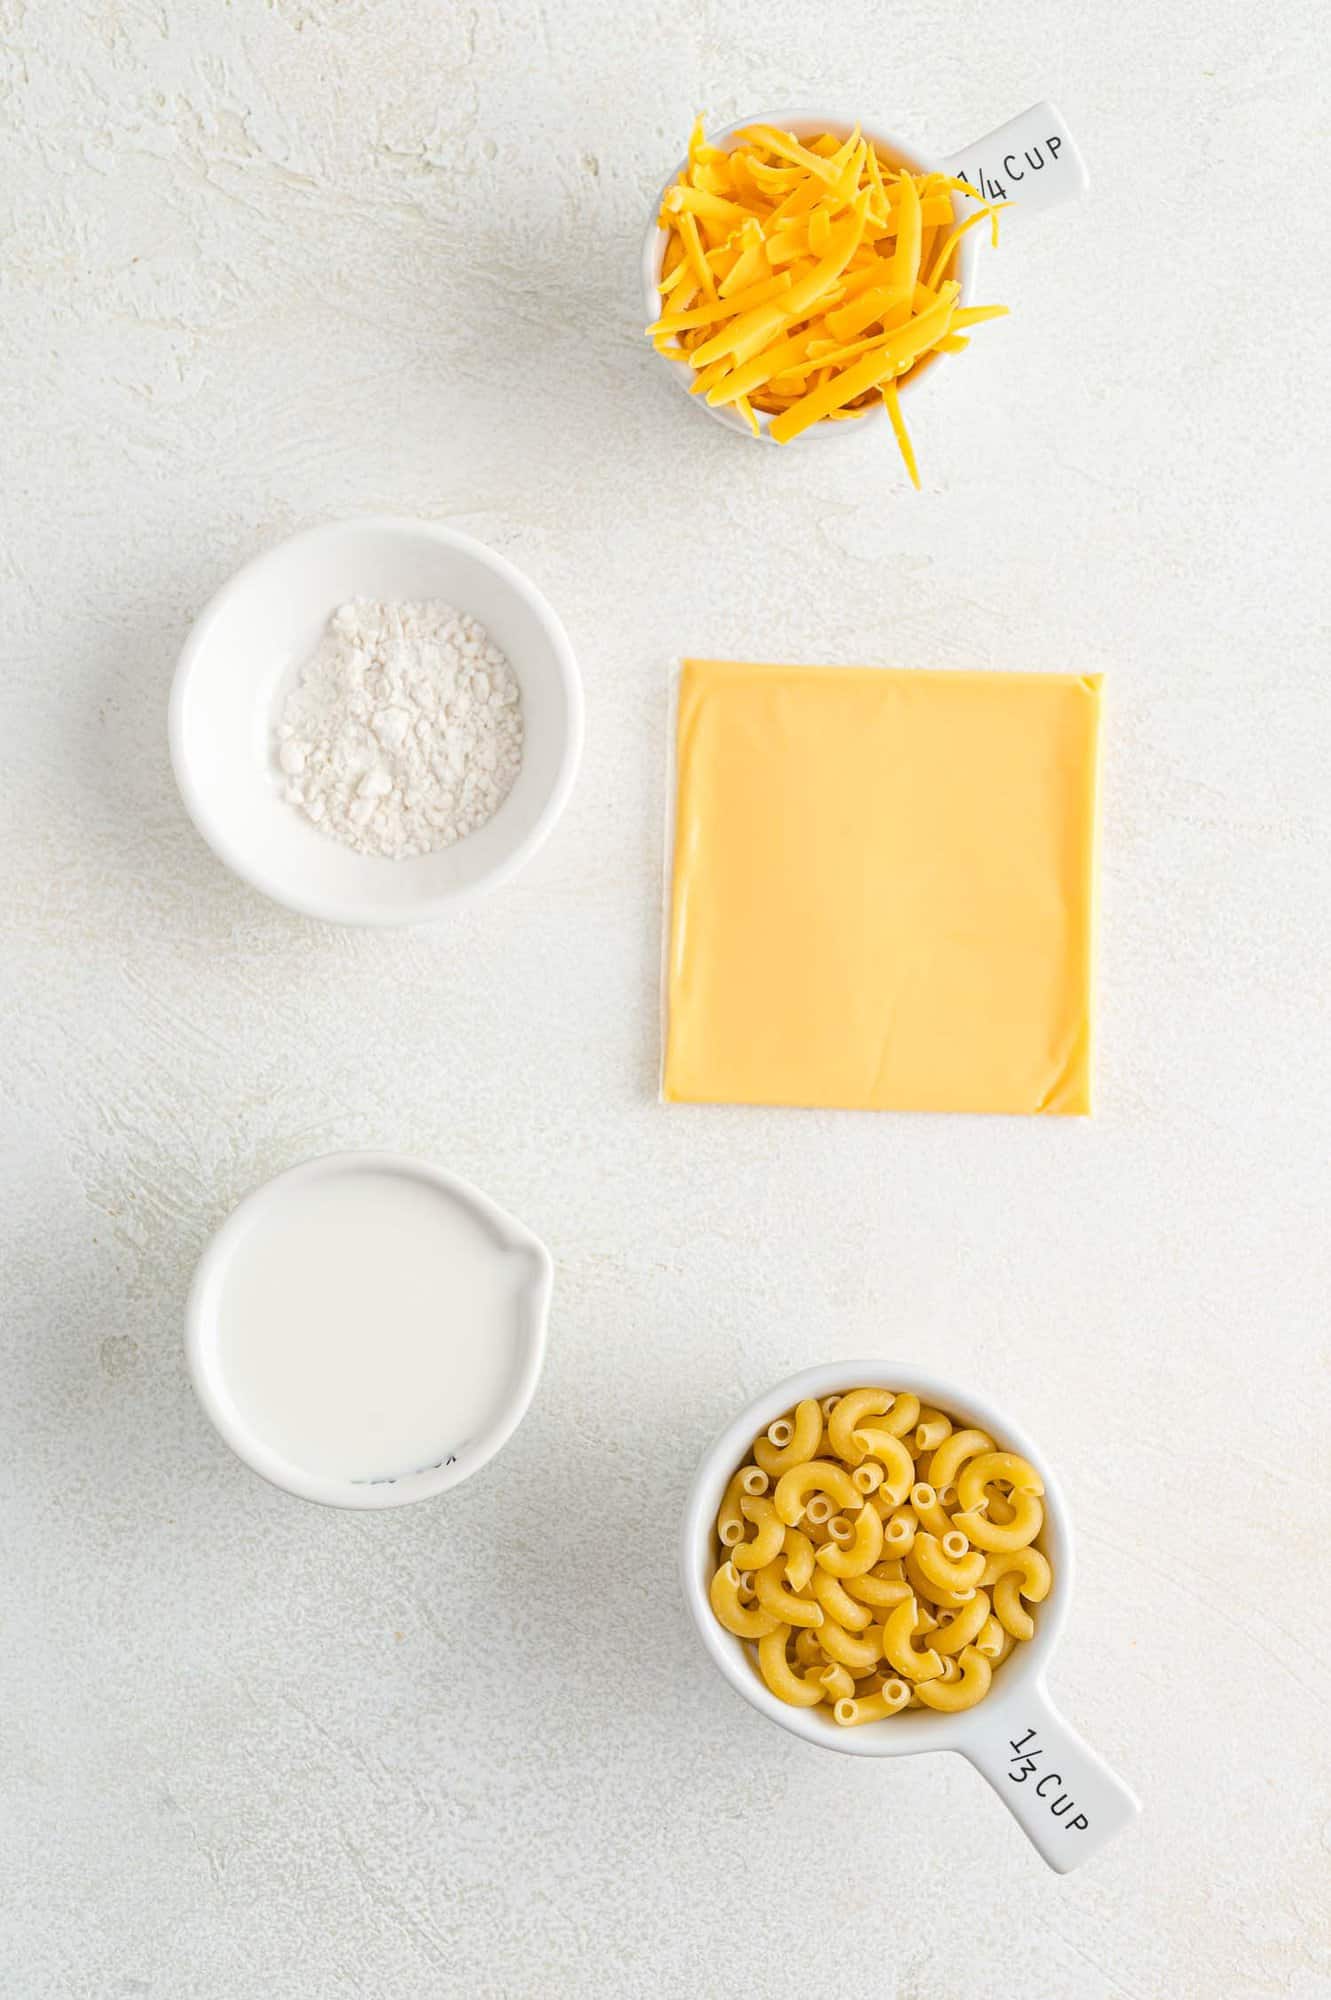 Ingredients needed for recipe, including cheese and macaroni pasta.